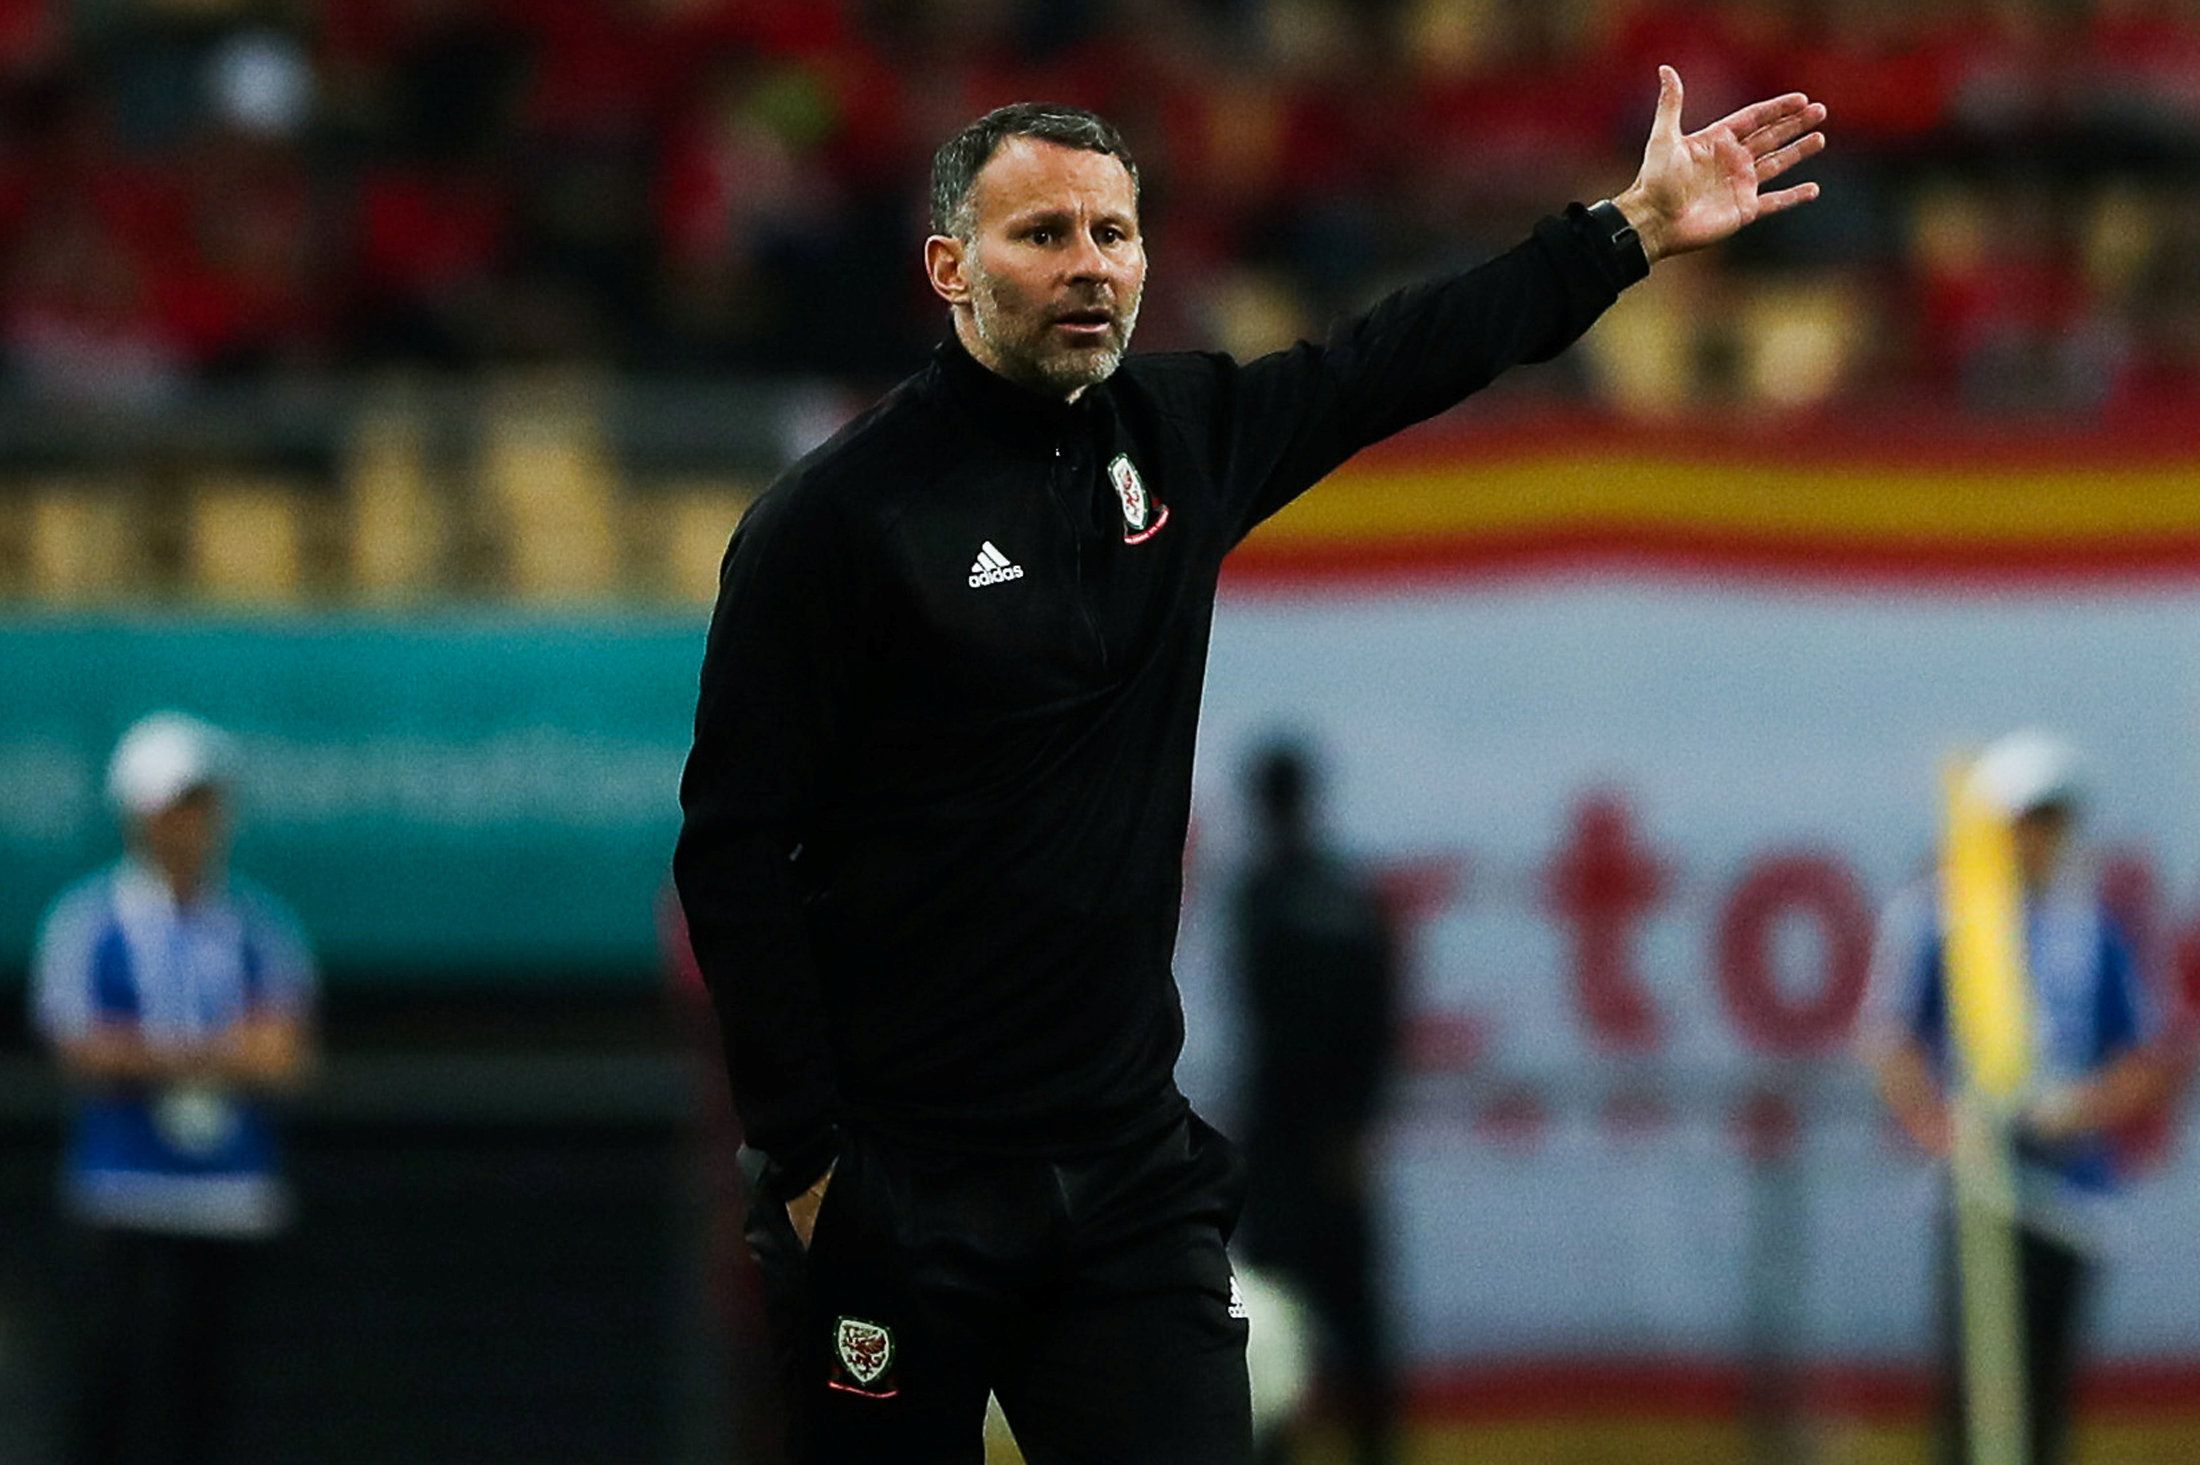 Football Soccer - China v Wales - China Cup Semi-Finals - Guangxi Sports Center, Nanning, China - March 22, 2018. Wales manager Ryan Giggs reacts. REUTERS/Stringer ATTENTION EDITORS - THIS IMAGE WAS PROVIDED BY A THIRD PARTY. CHINA OUT.